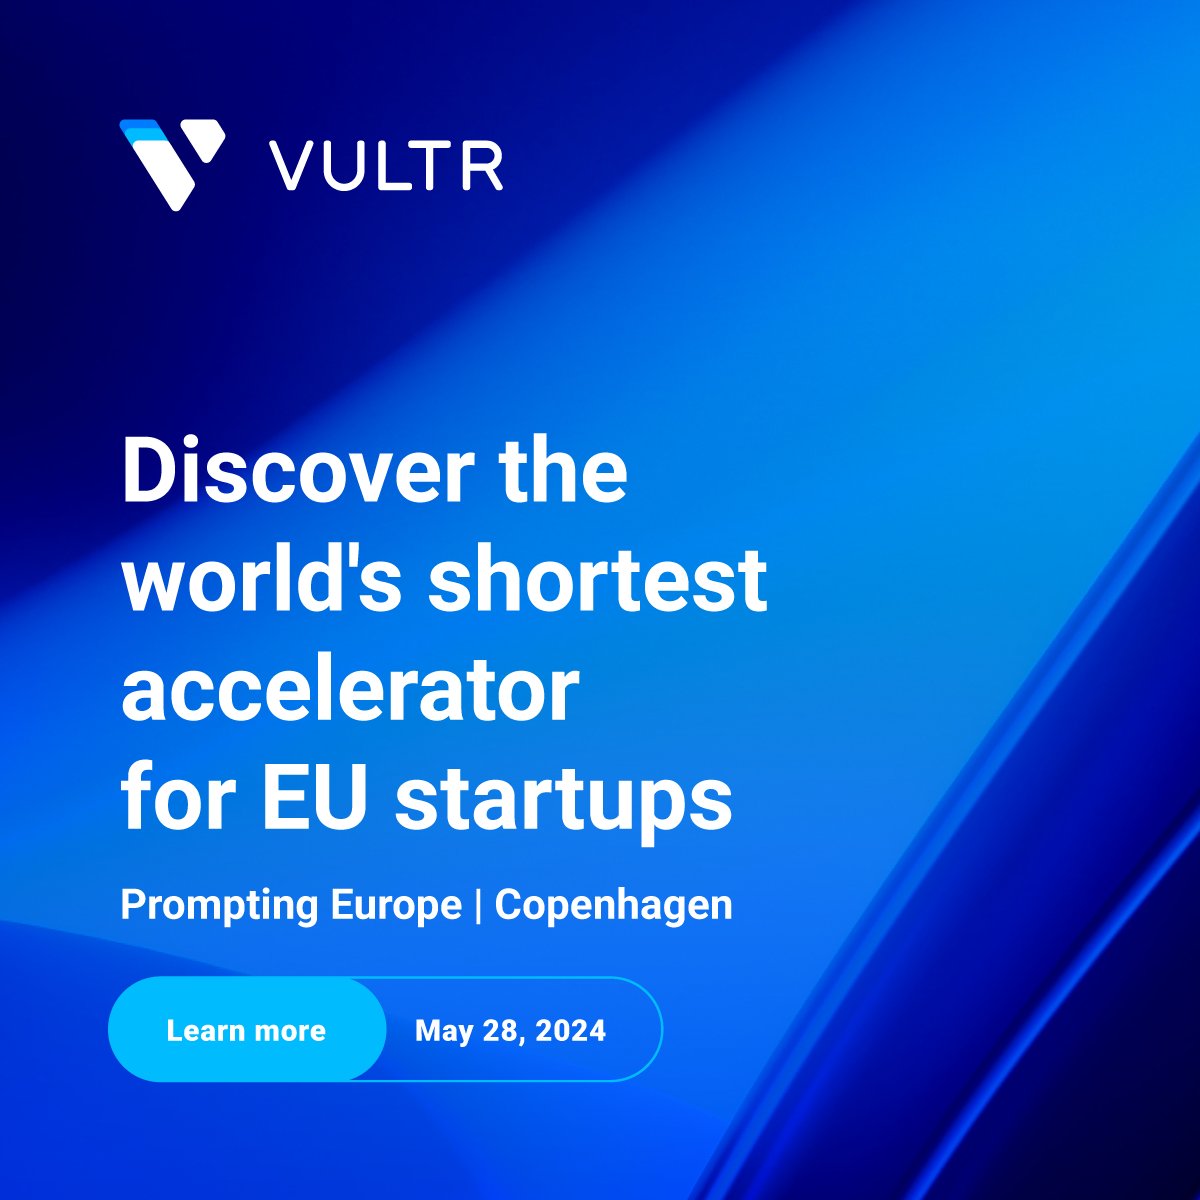 From first-time founders to seasoned serial entrepreneurs – join Vultr at Prompting Europe Copenhagen on 5/28 and get a shortcut to unleashing Europe's tech potential! eventbrite.nl/e/prompting-eu…